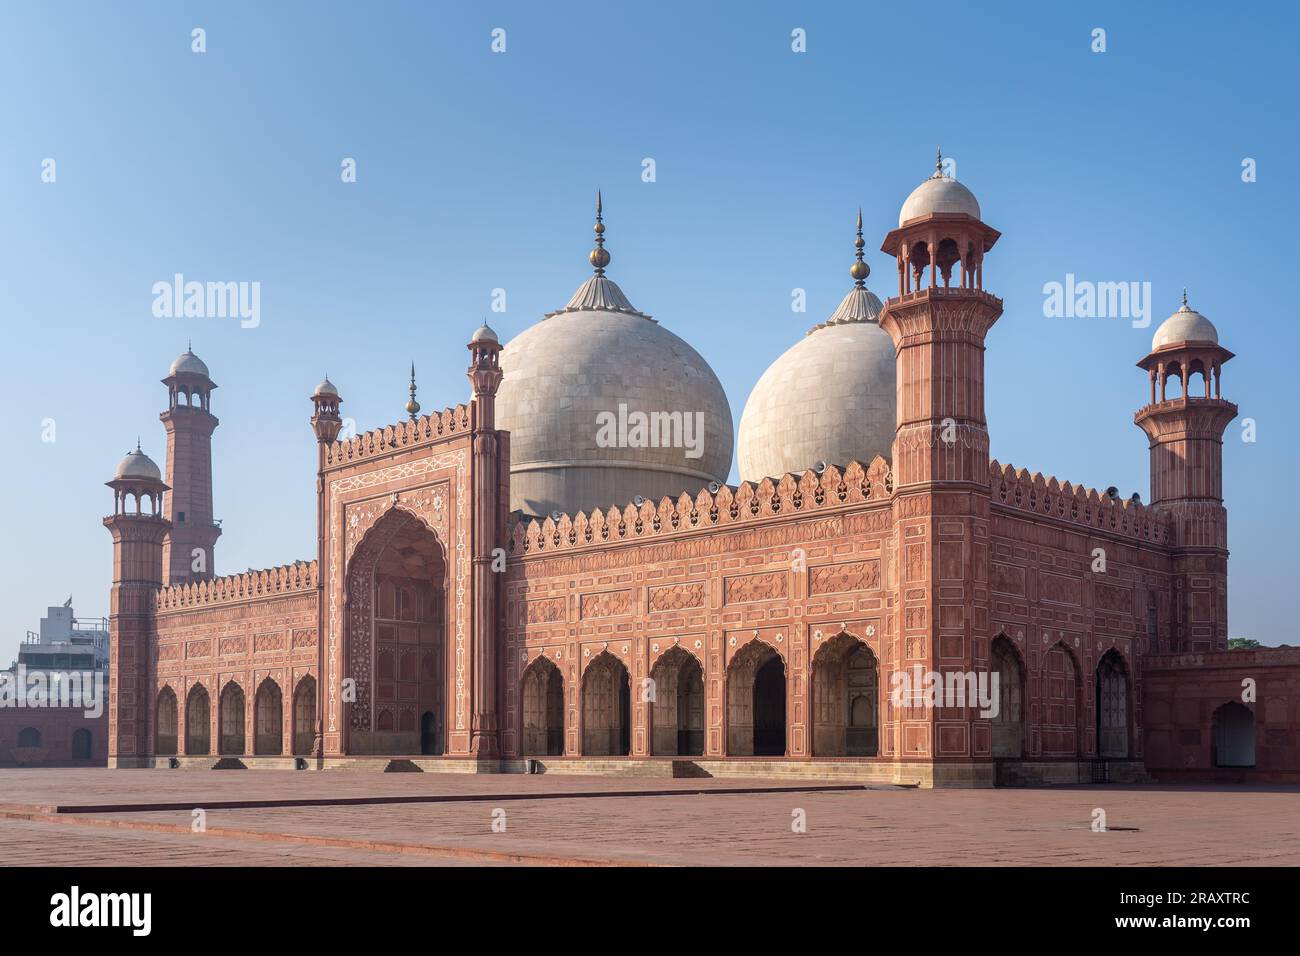 Side view of beautiful ancient Badshahi mosque with courtyard built by mughal emperor Aurangzeb a landmark of Lahore, Punjab, Pakistan Stock Photo